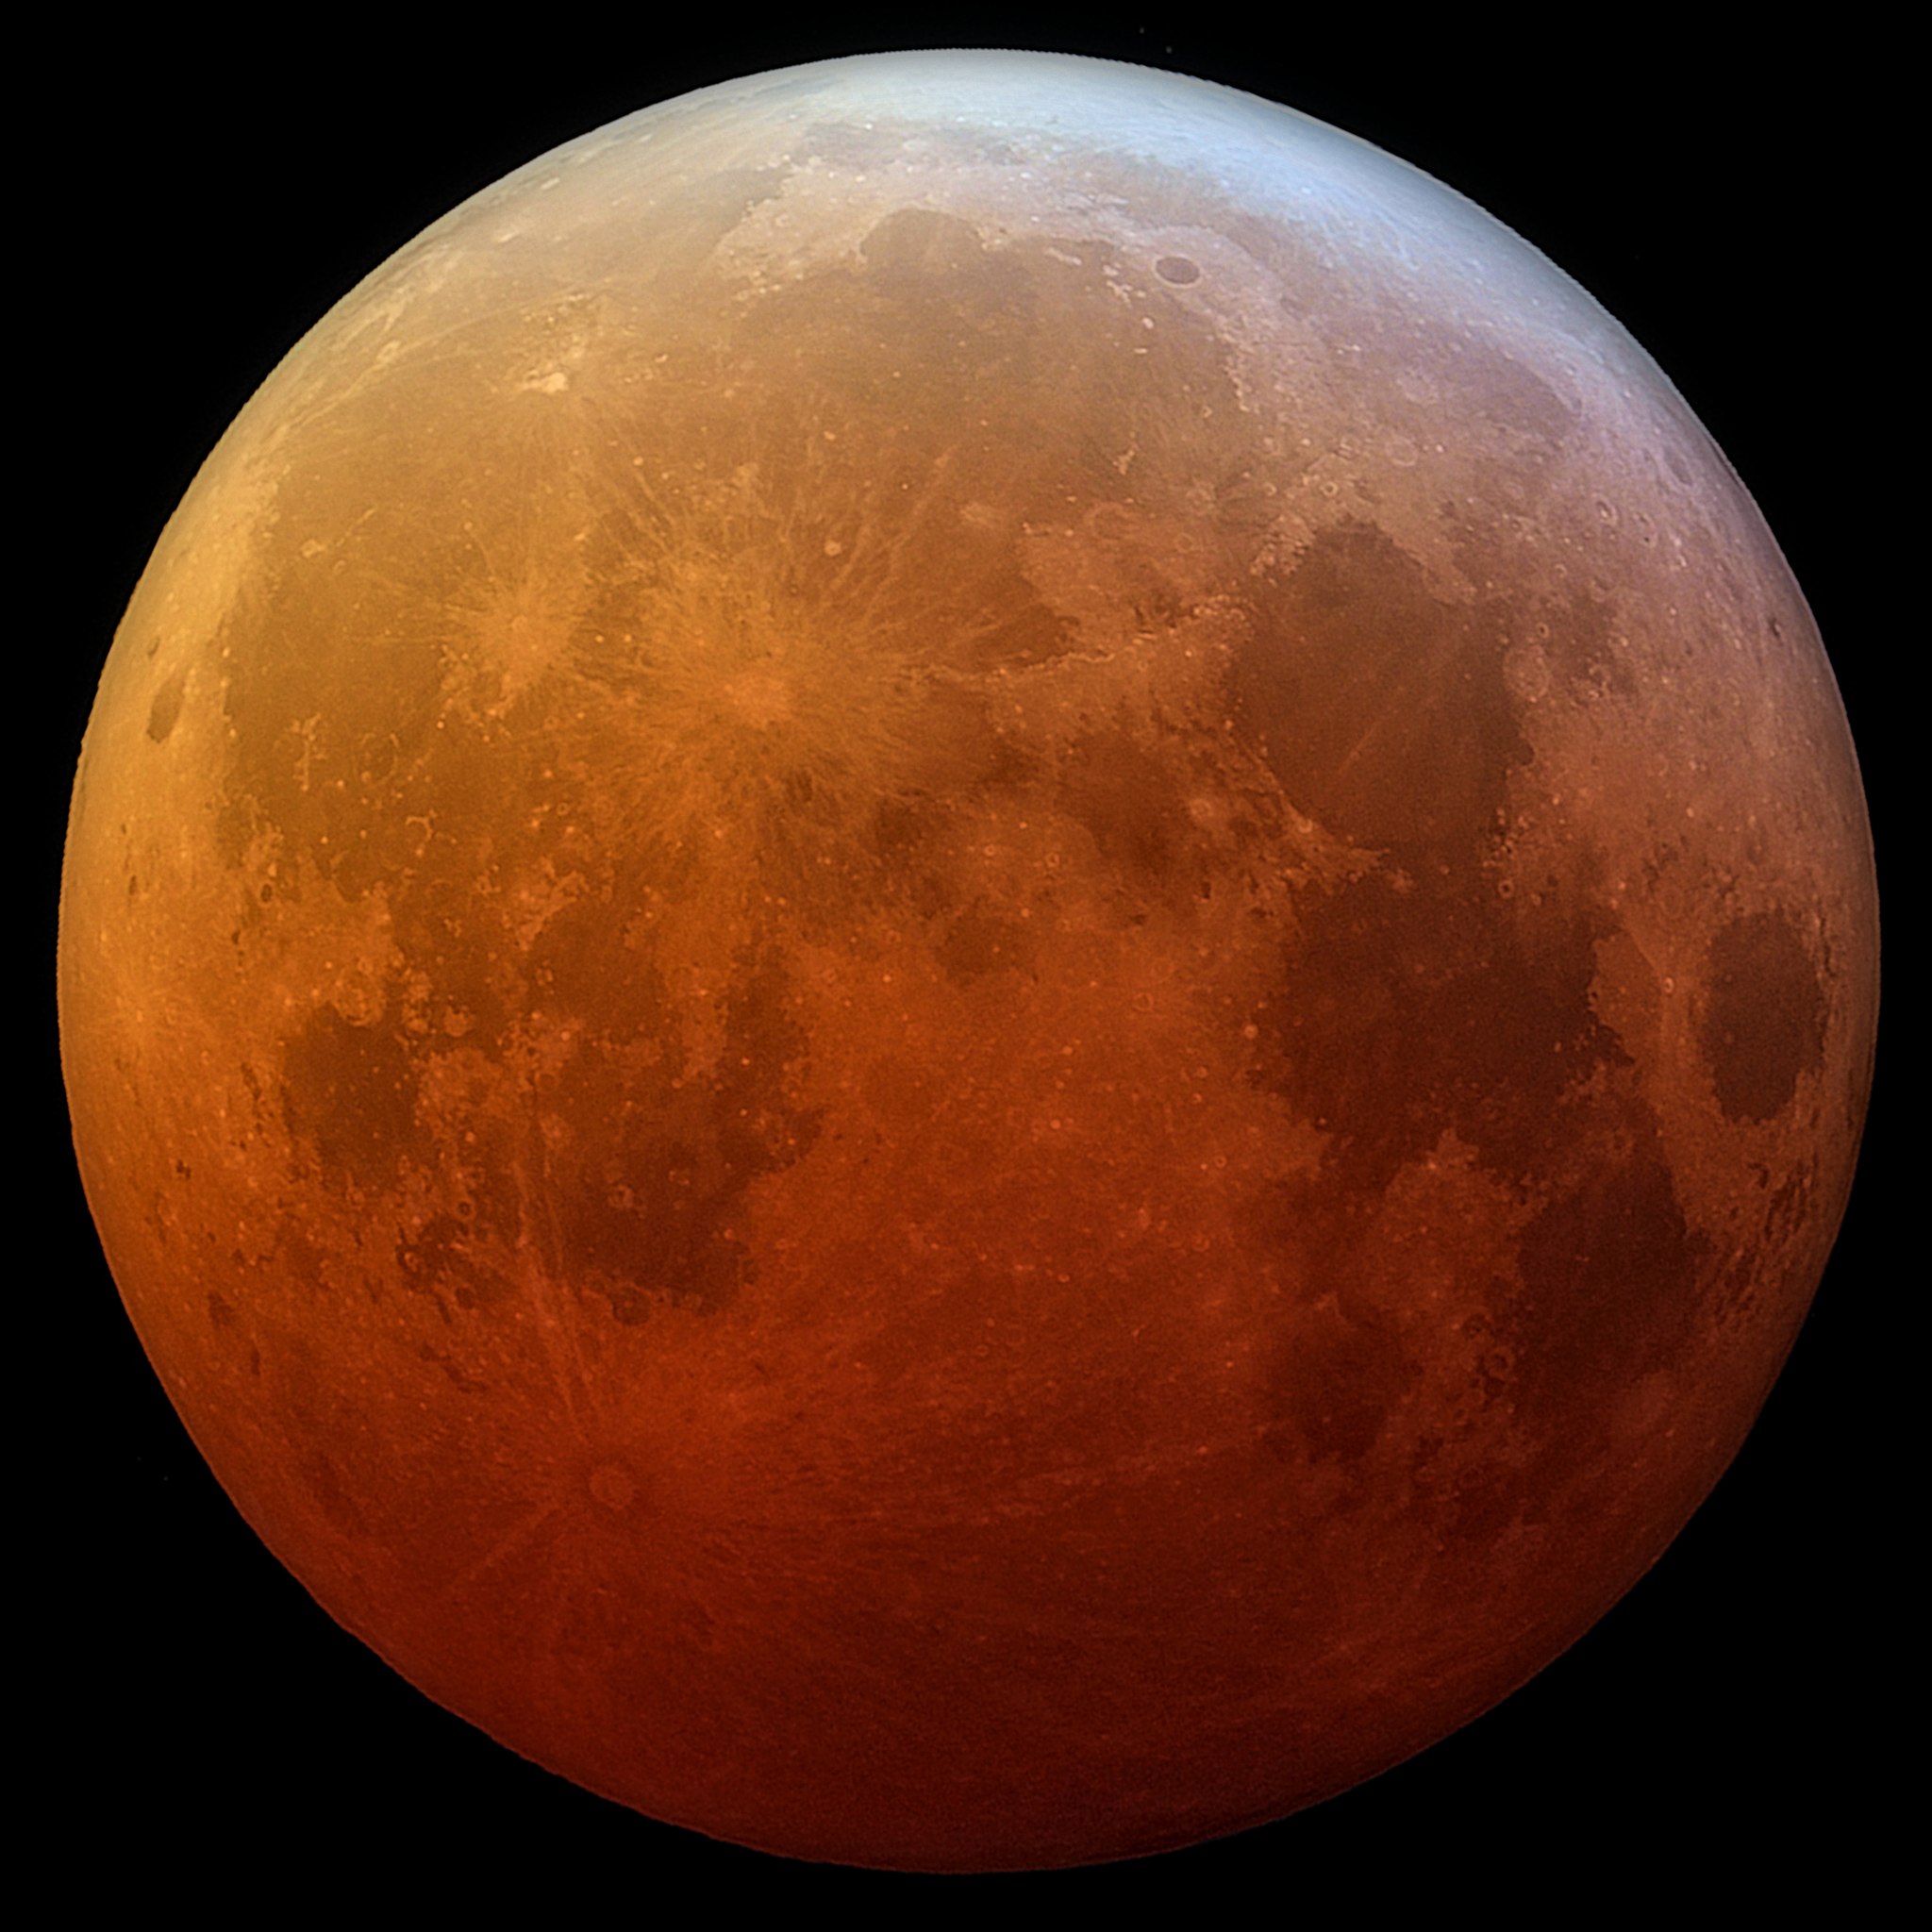 A detailed look at the Moon during a total lunar eclipse. It has an eerie orangish-red color.